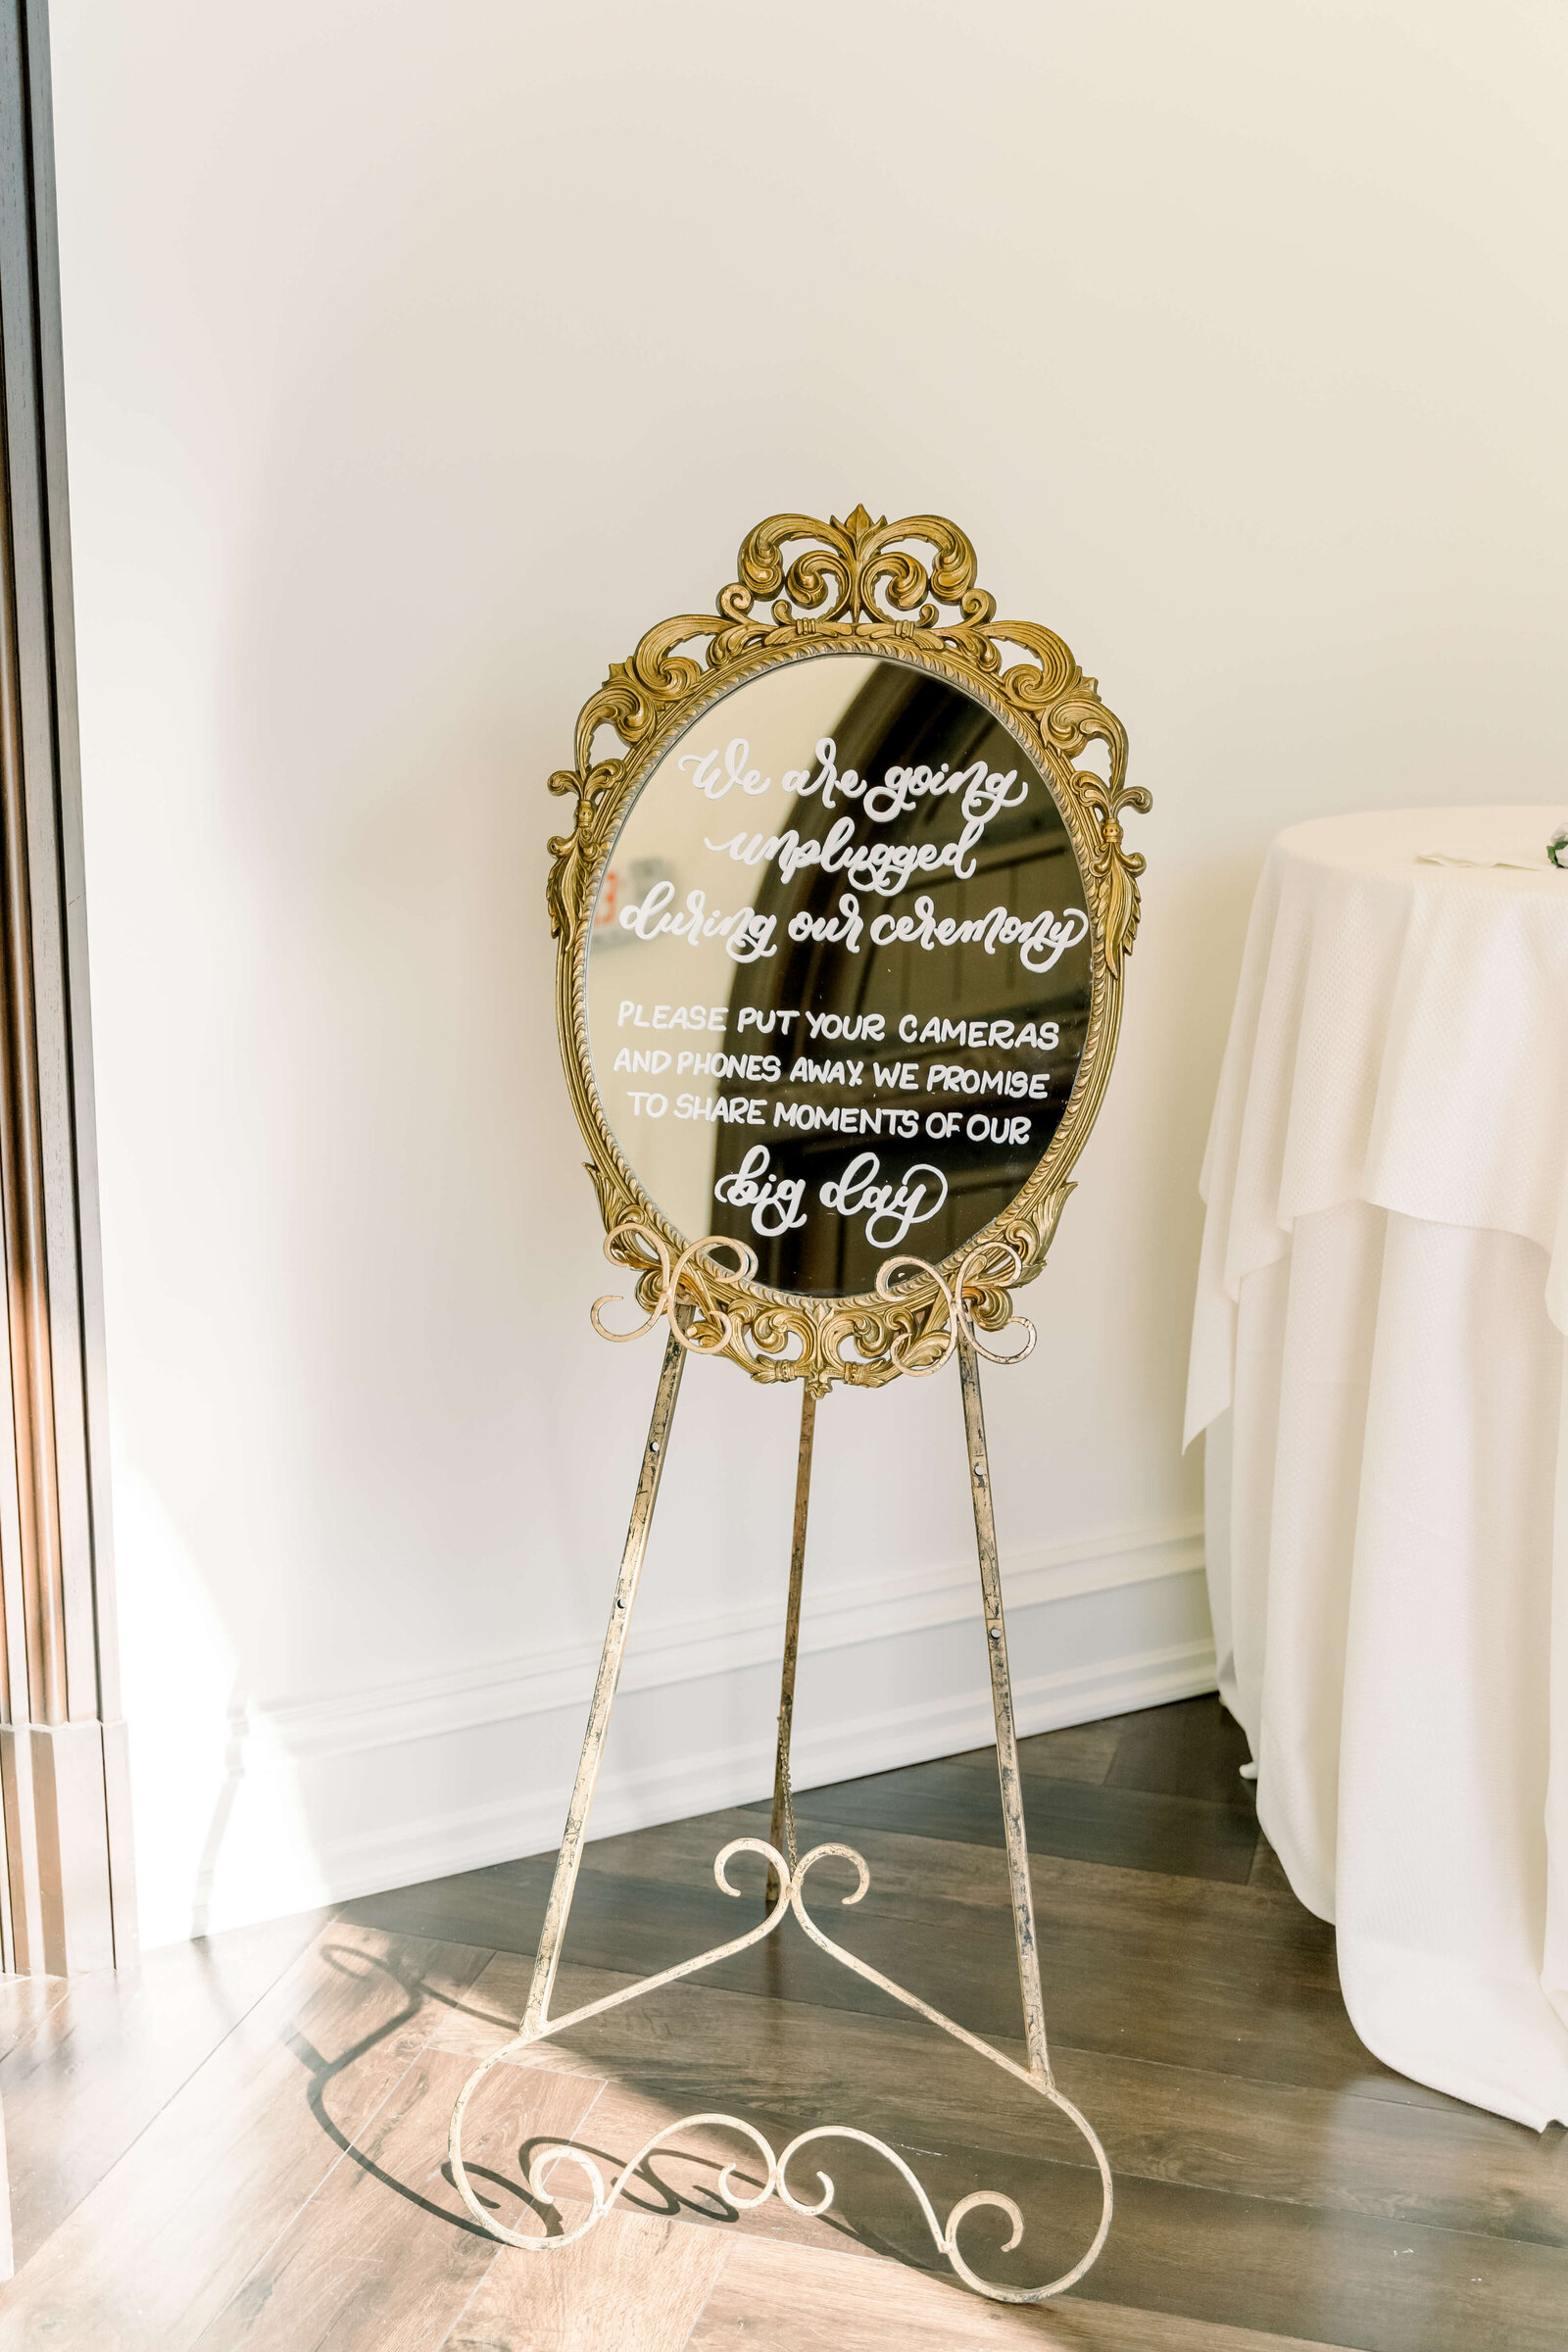 SGH Creative Luxury Wedding Calligraphy & Design in New York & New Jersey - Jennifer and Justin Whalley (30)